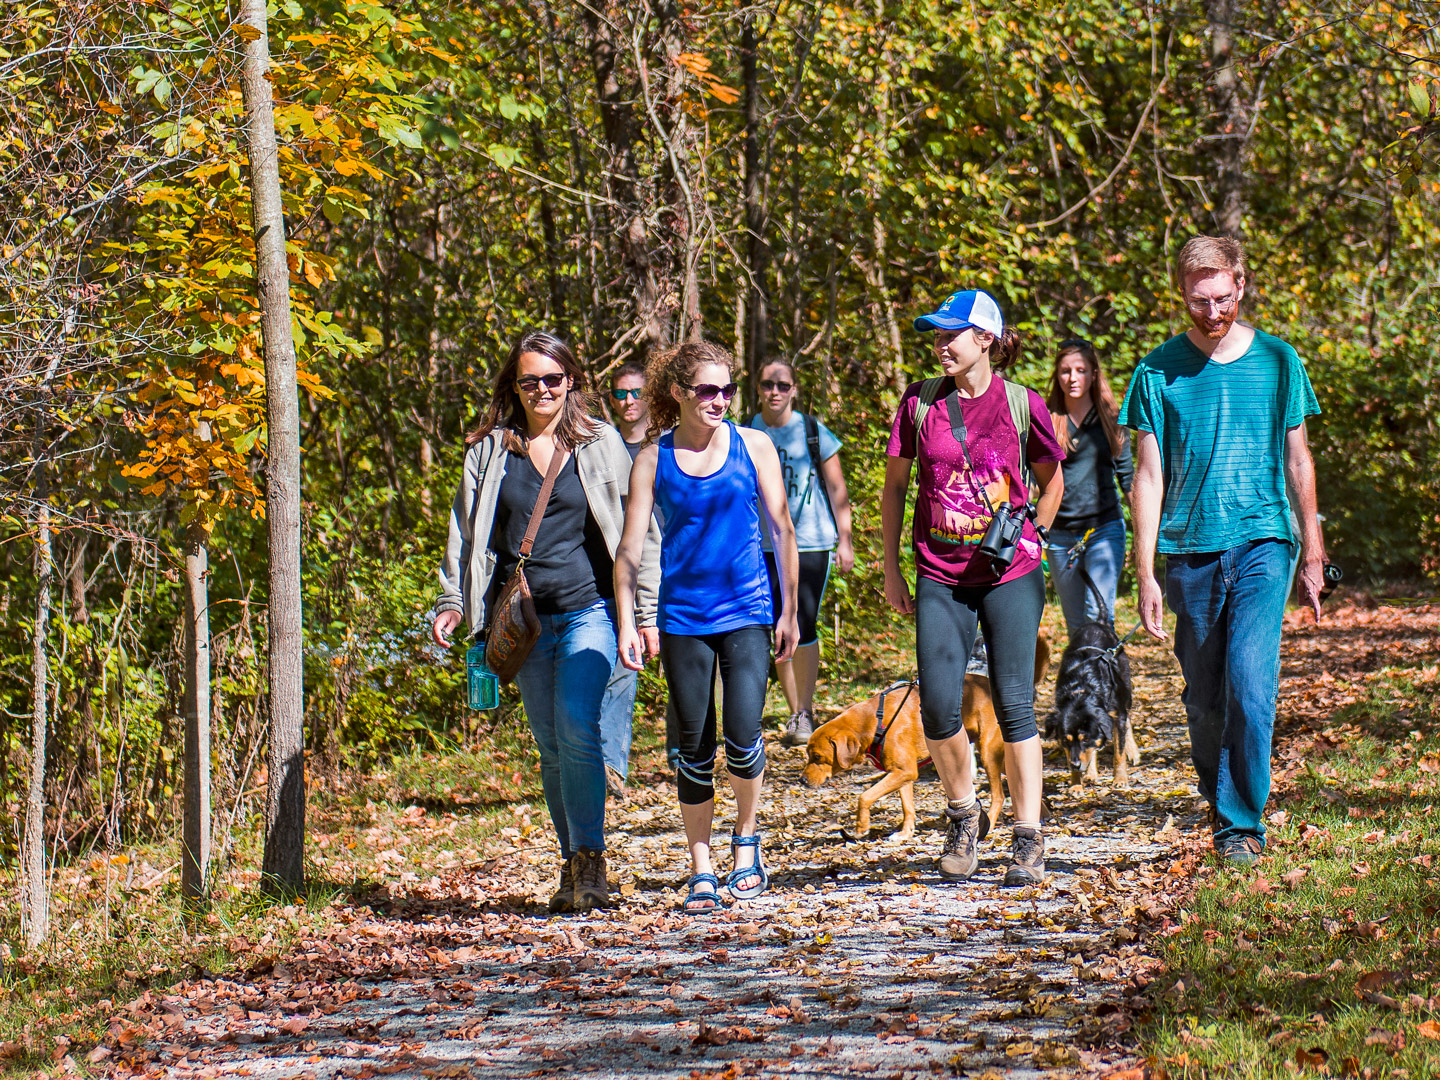 Visitors walk their dogs in the fall sunshine at Battelle Darby Creek. (John Nixon)